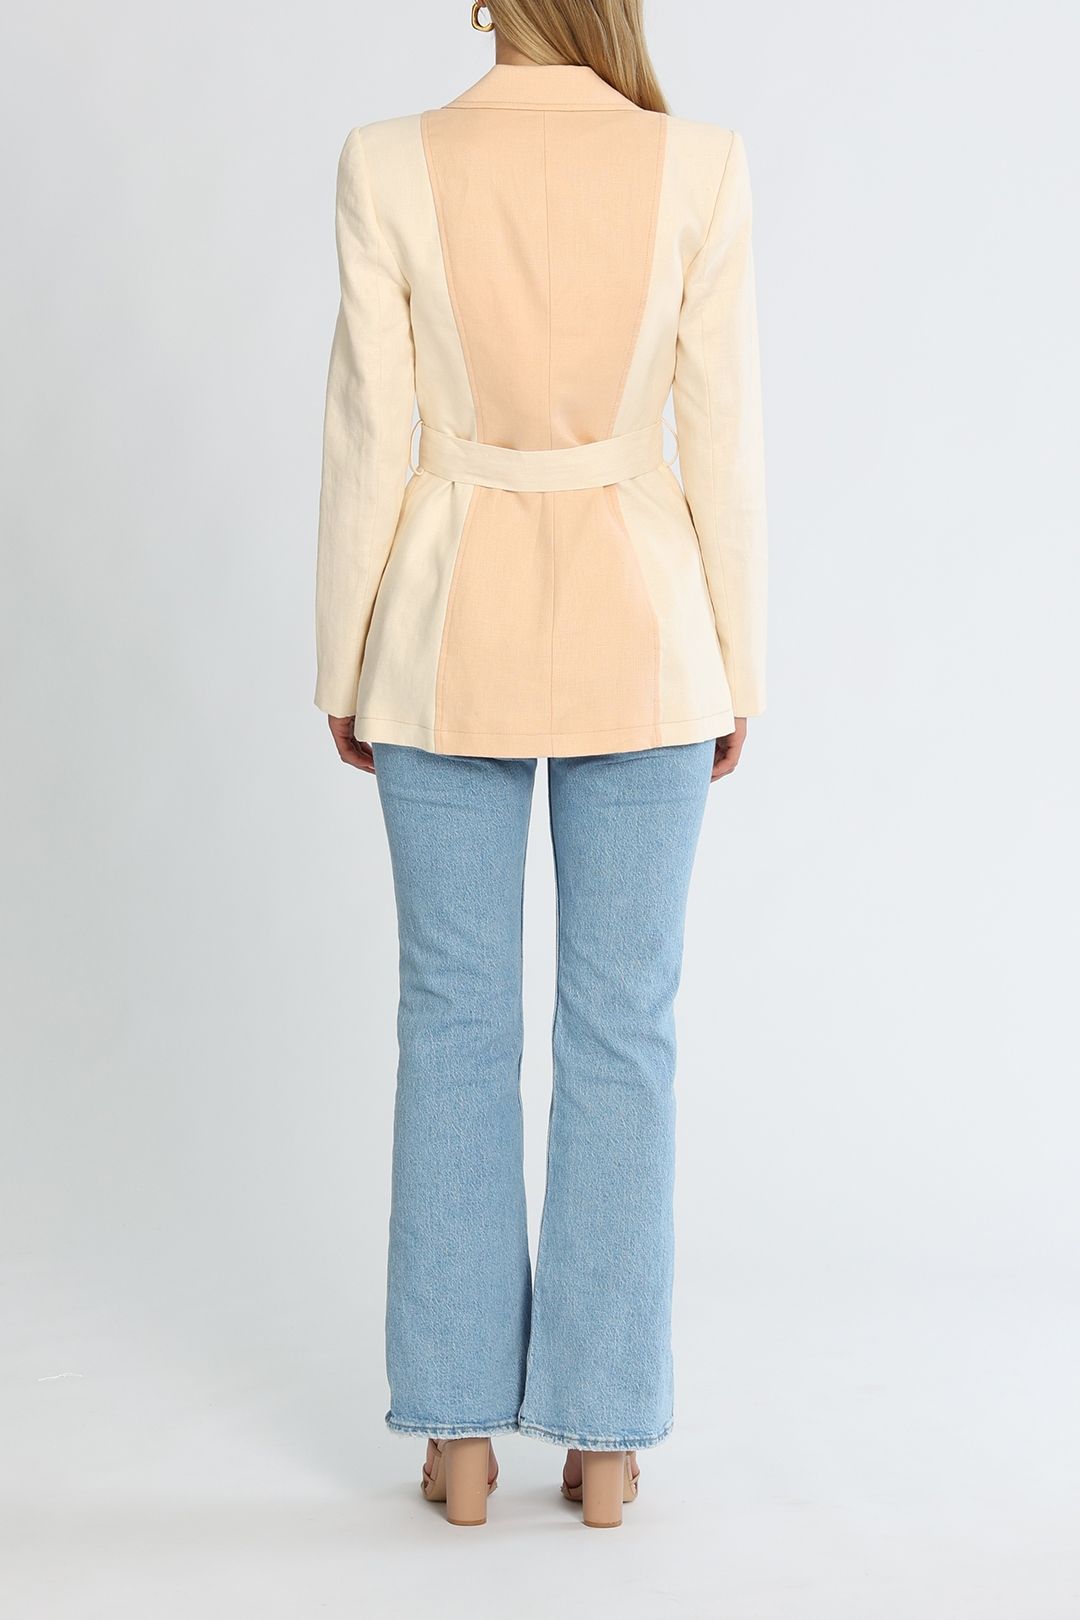 Significant Other Gilder Blazer Peach With Cream Collared